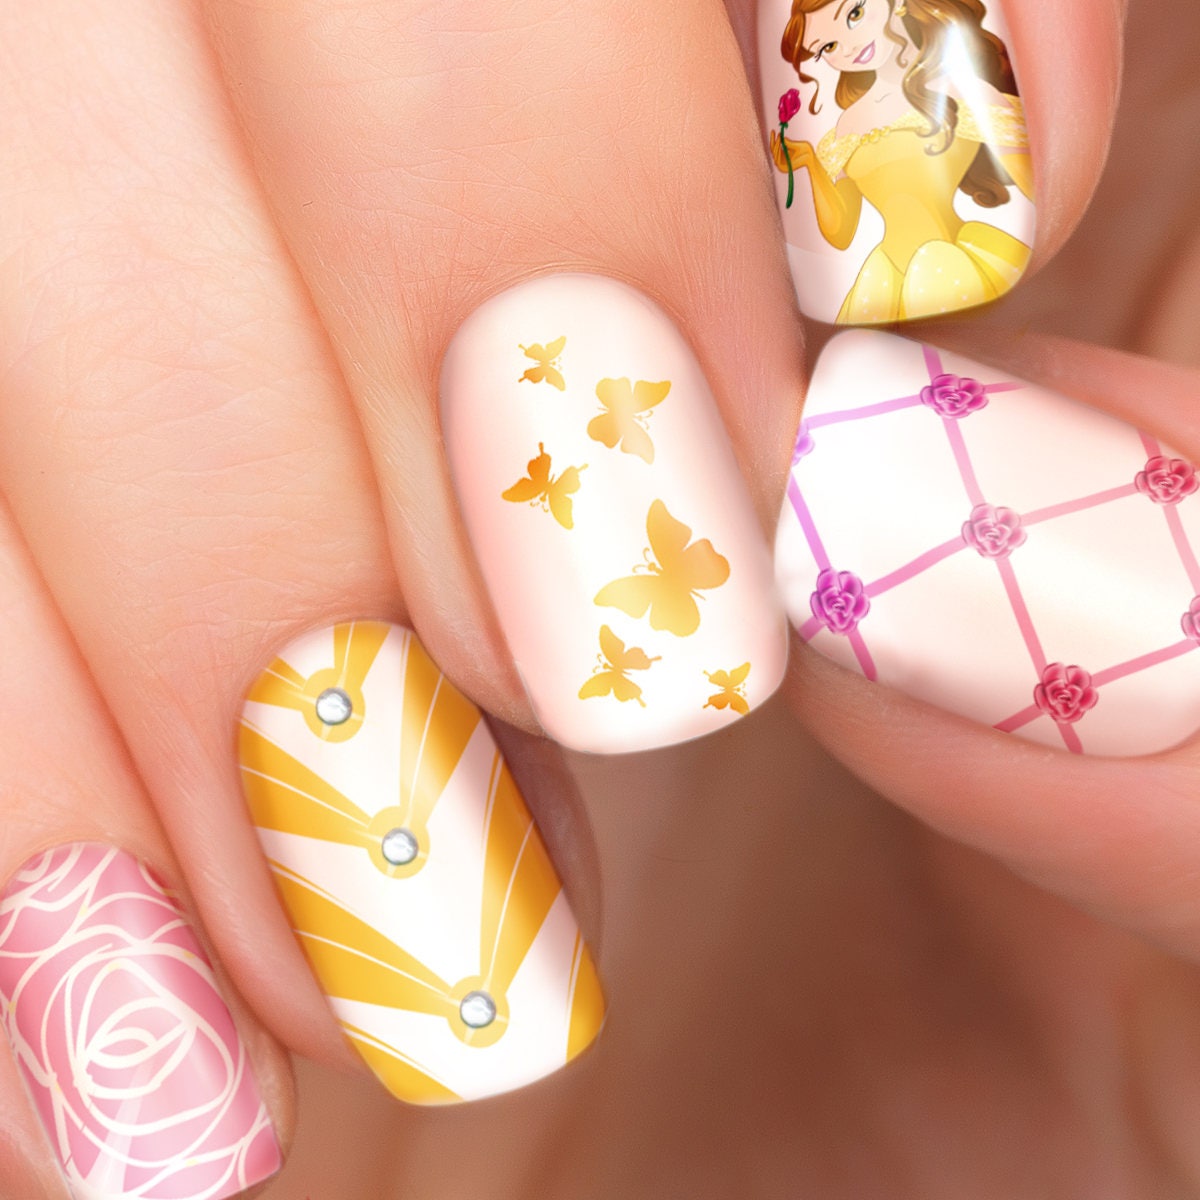 Belle Disney nail transfers illustrated nail art decals